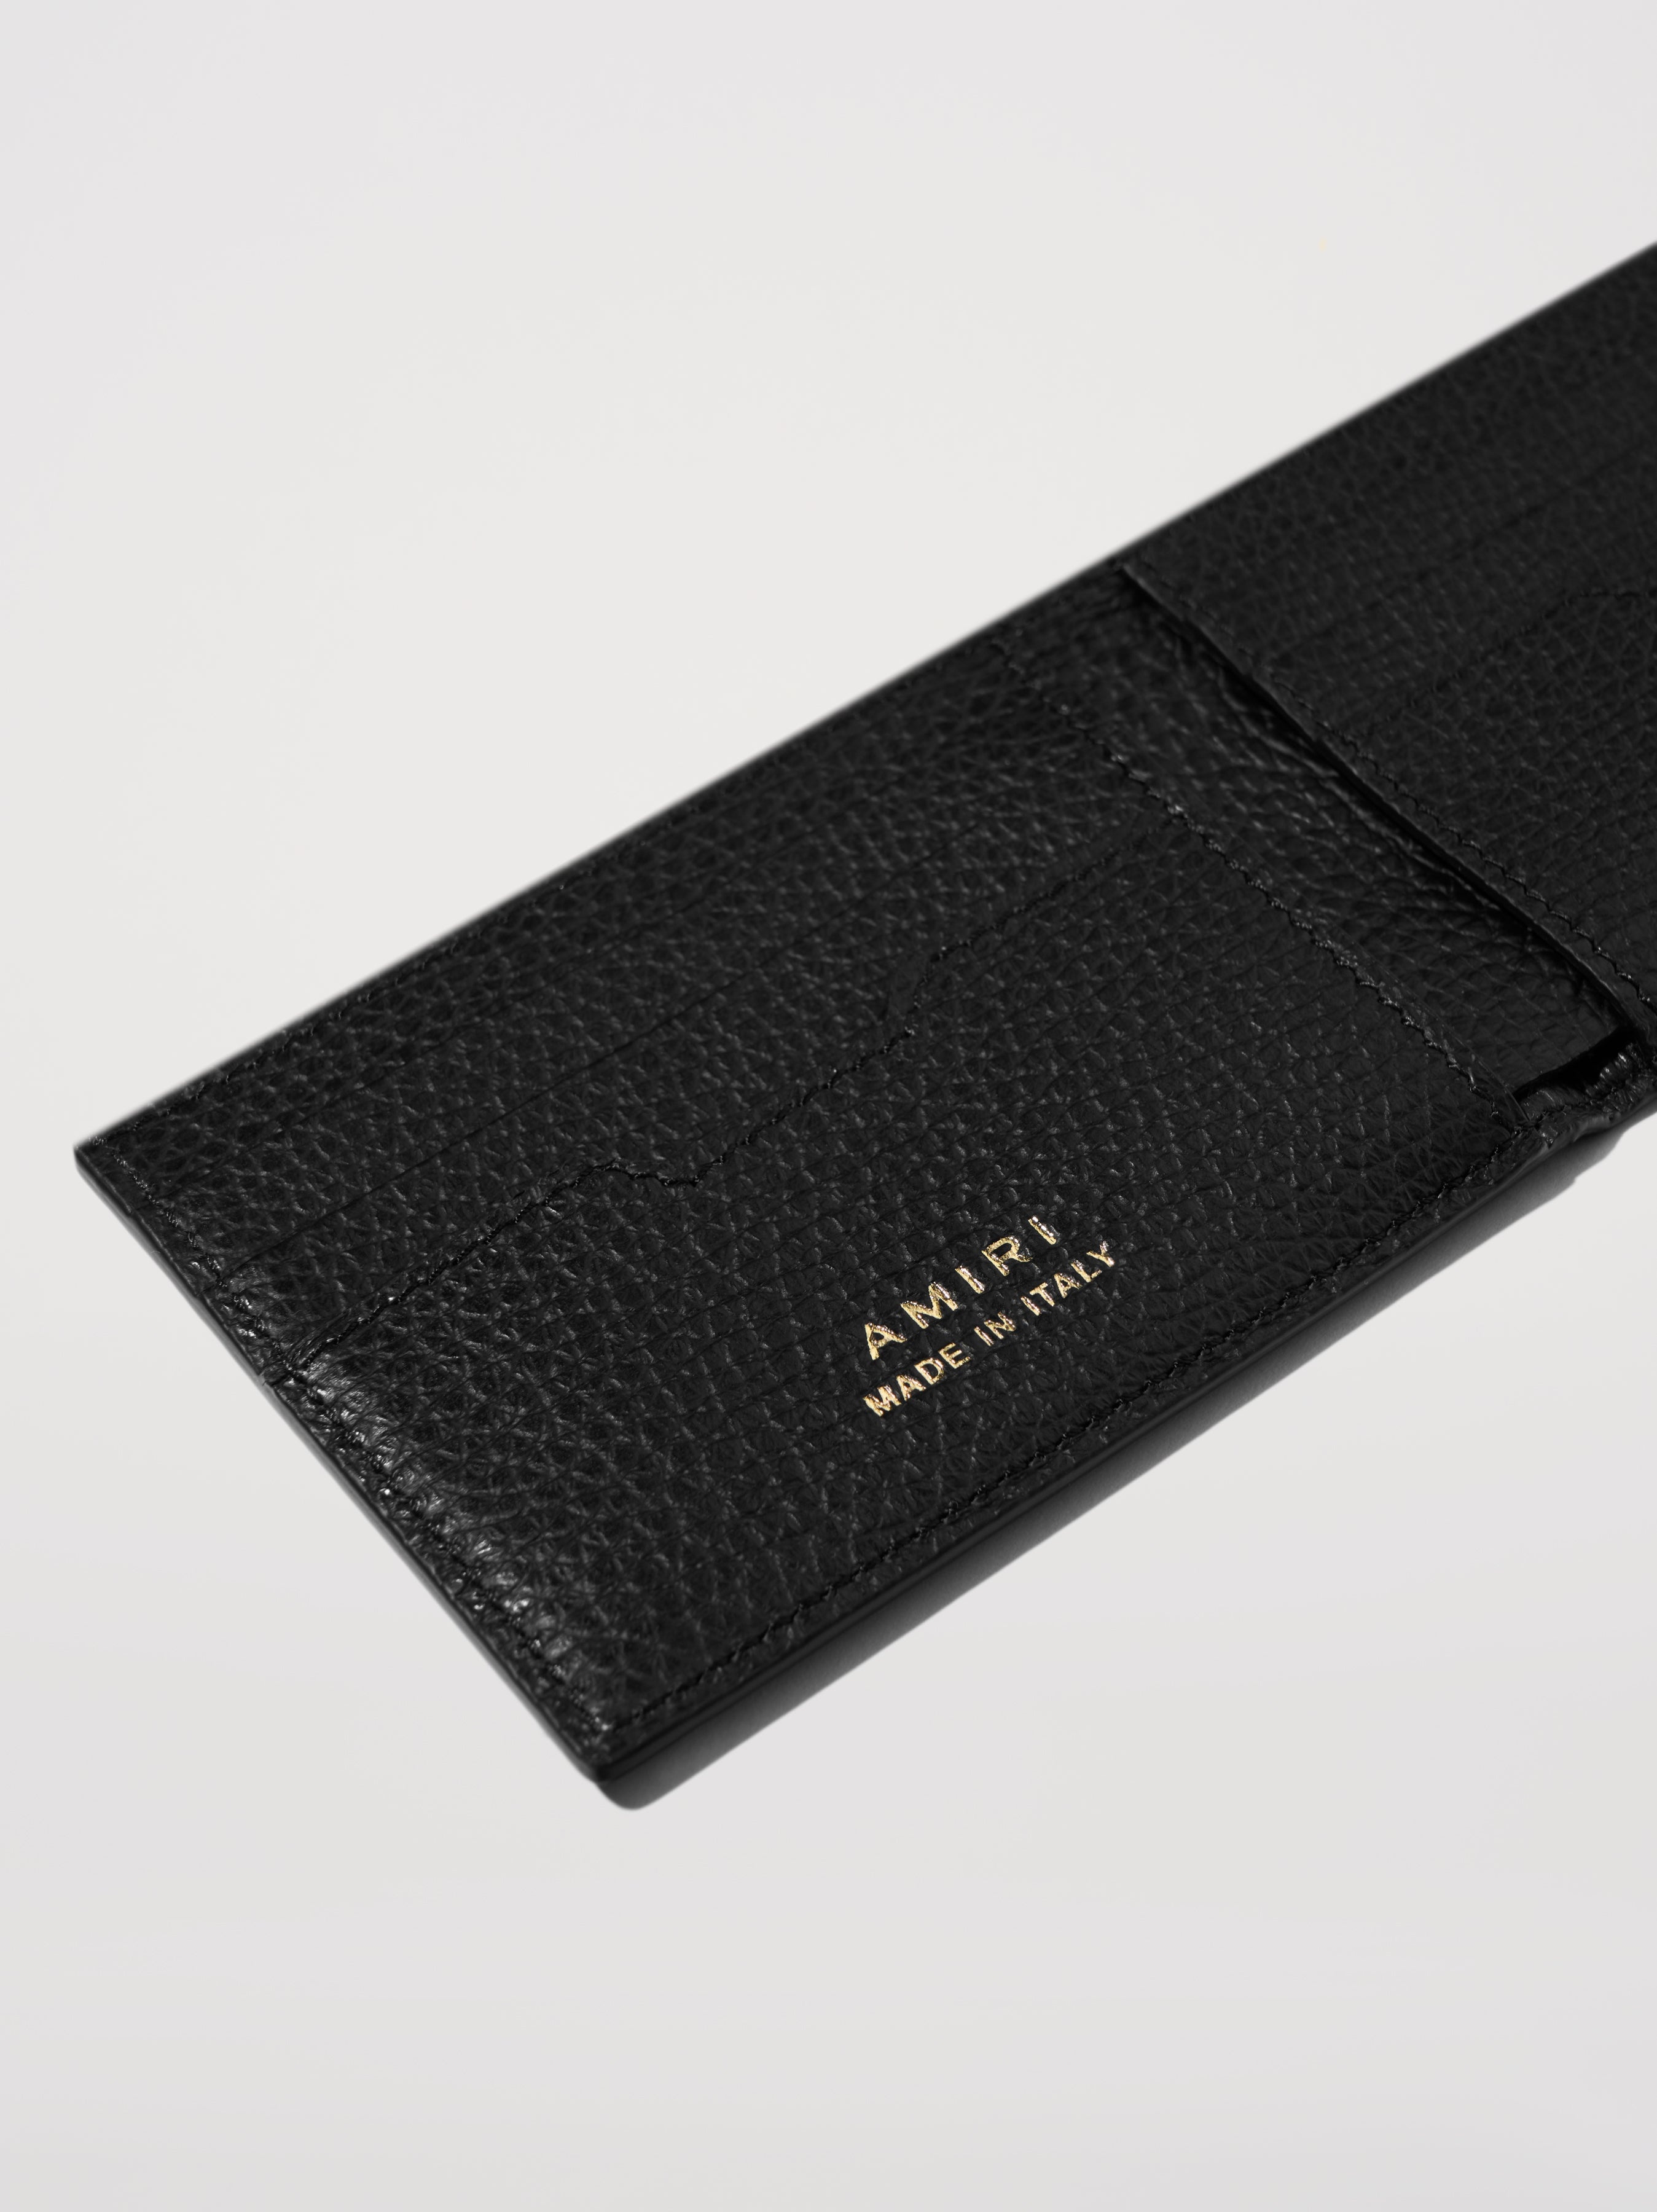 M.A. CLASSIC BIFOLD WALLET - 4